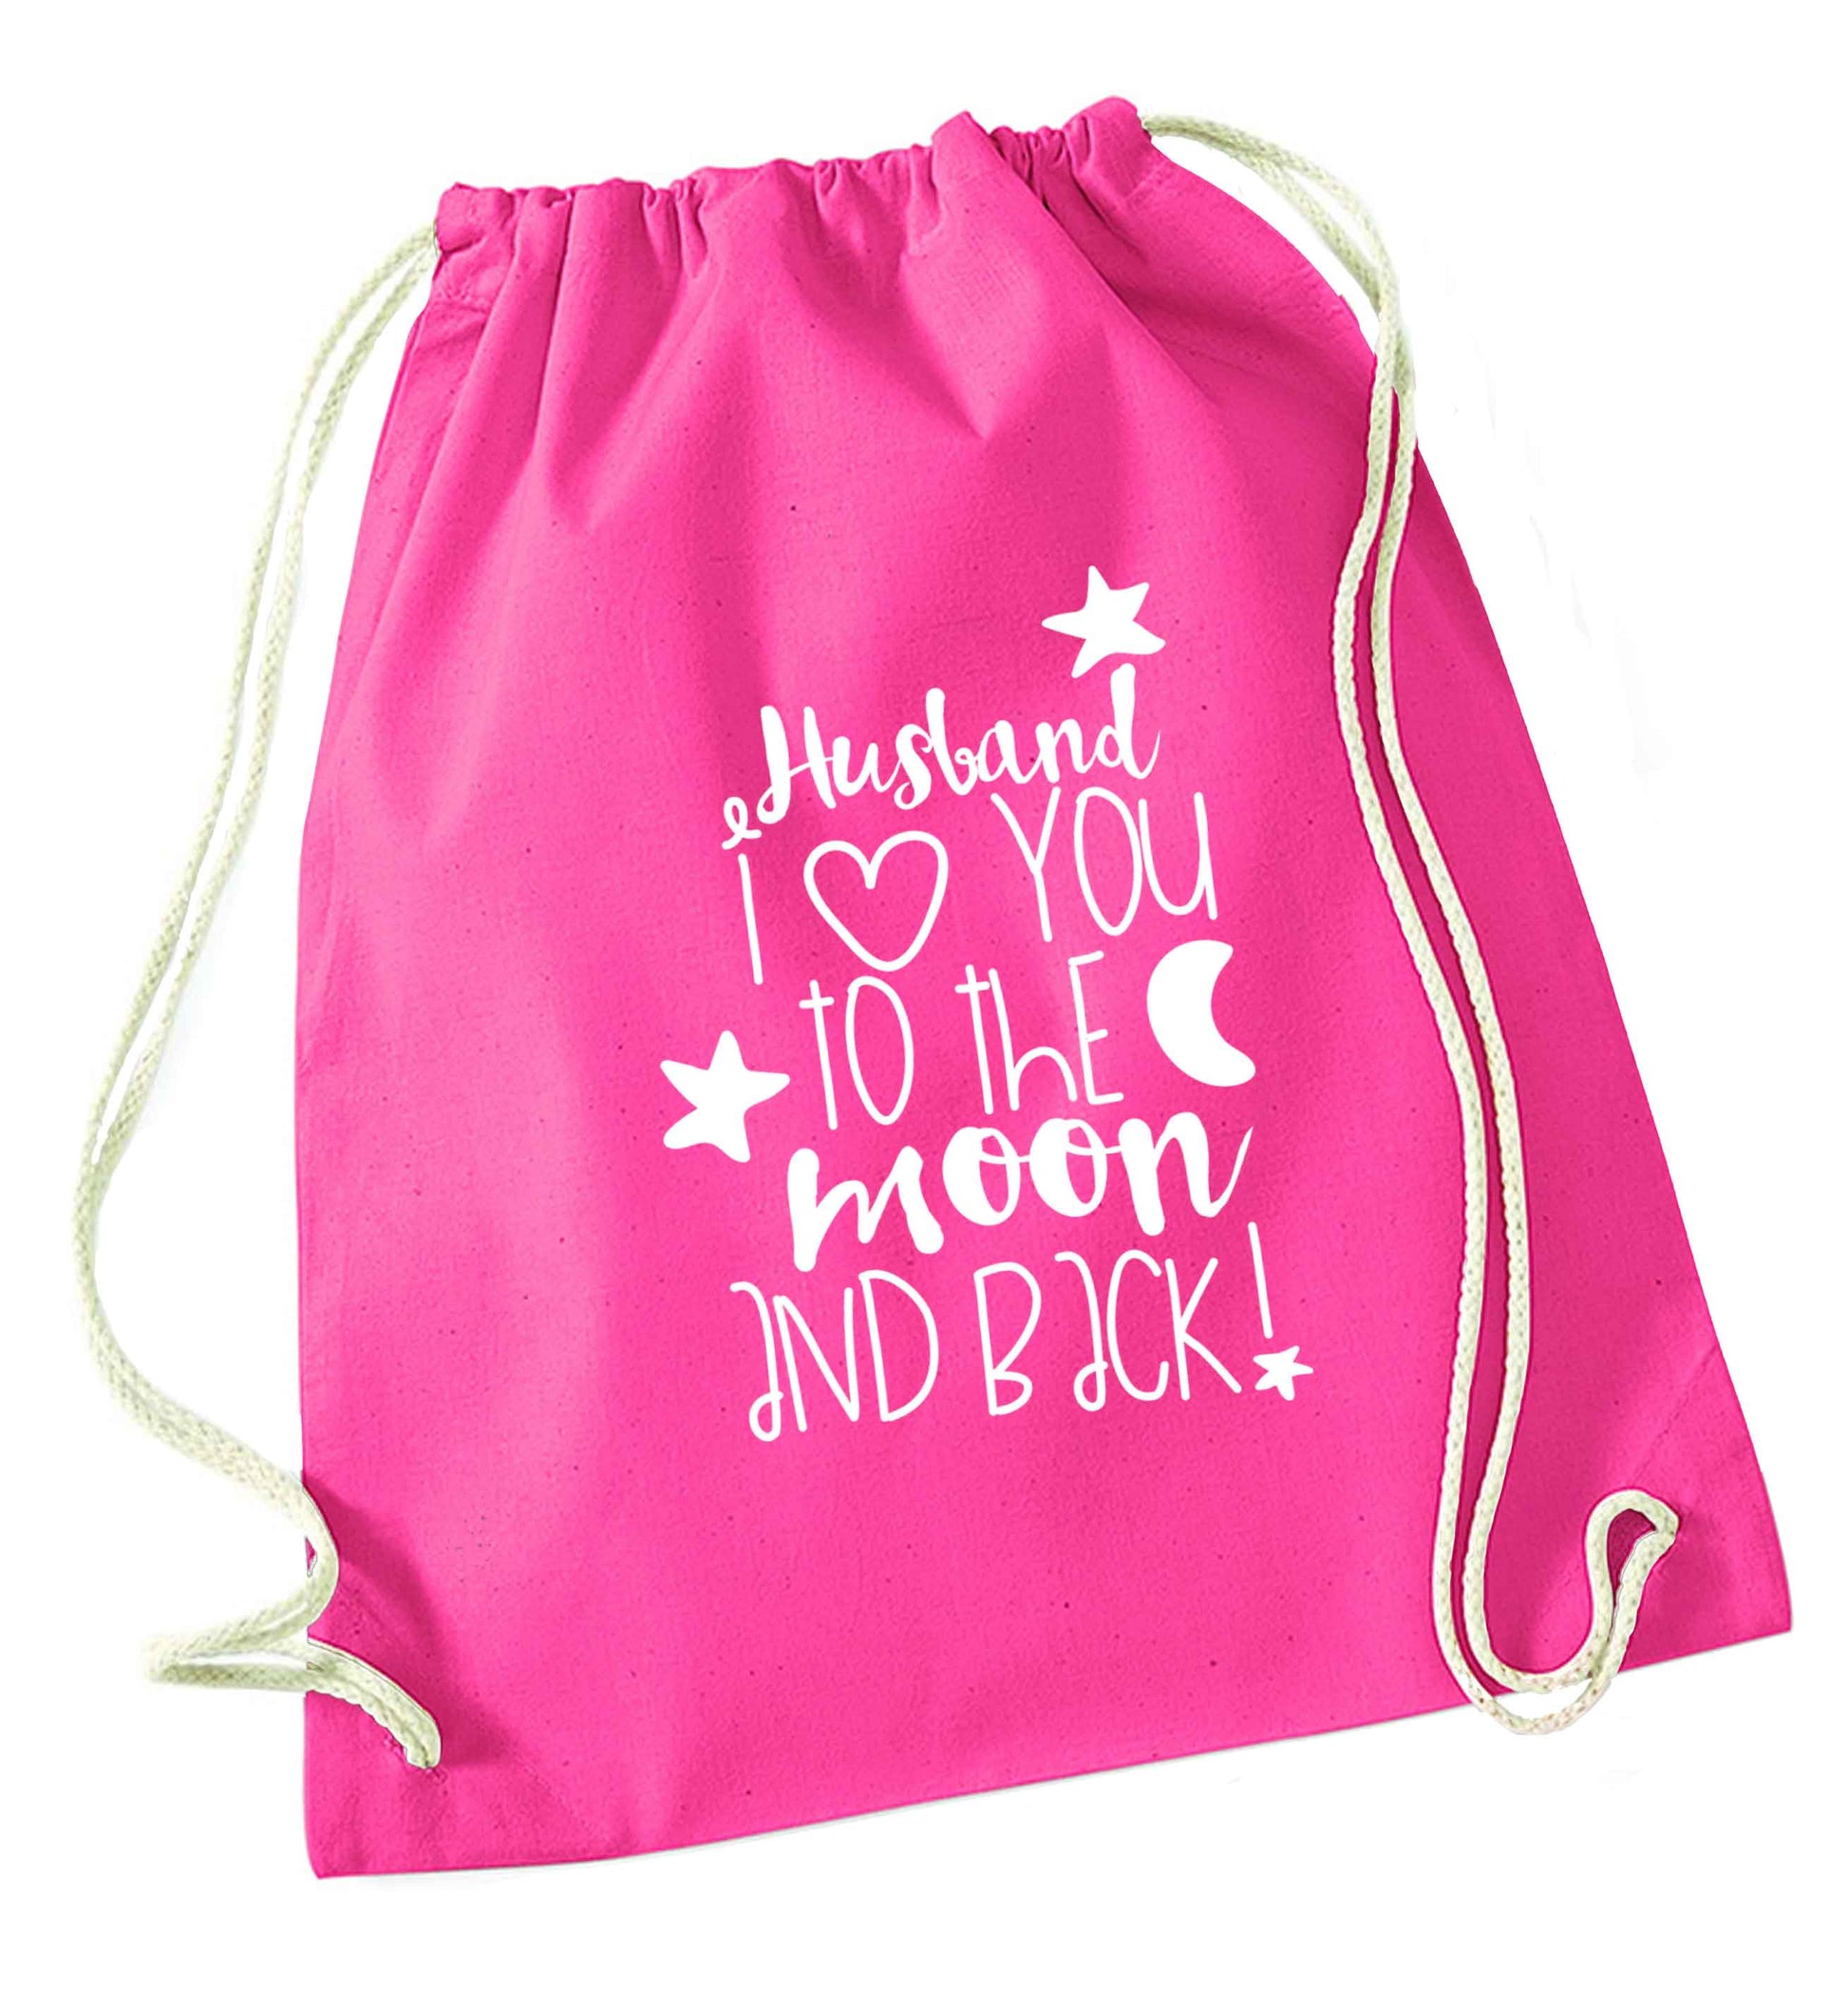 Husband I love you to the moon and back pink drawstring bag